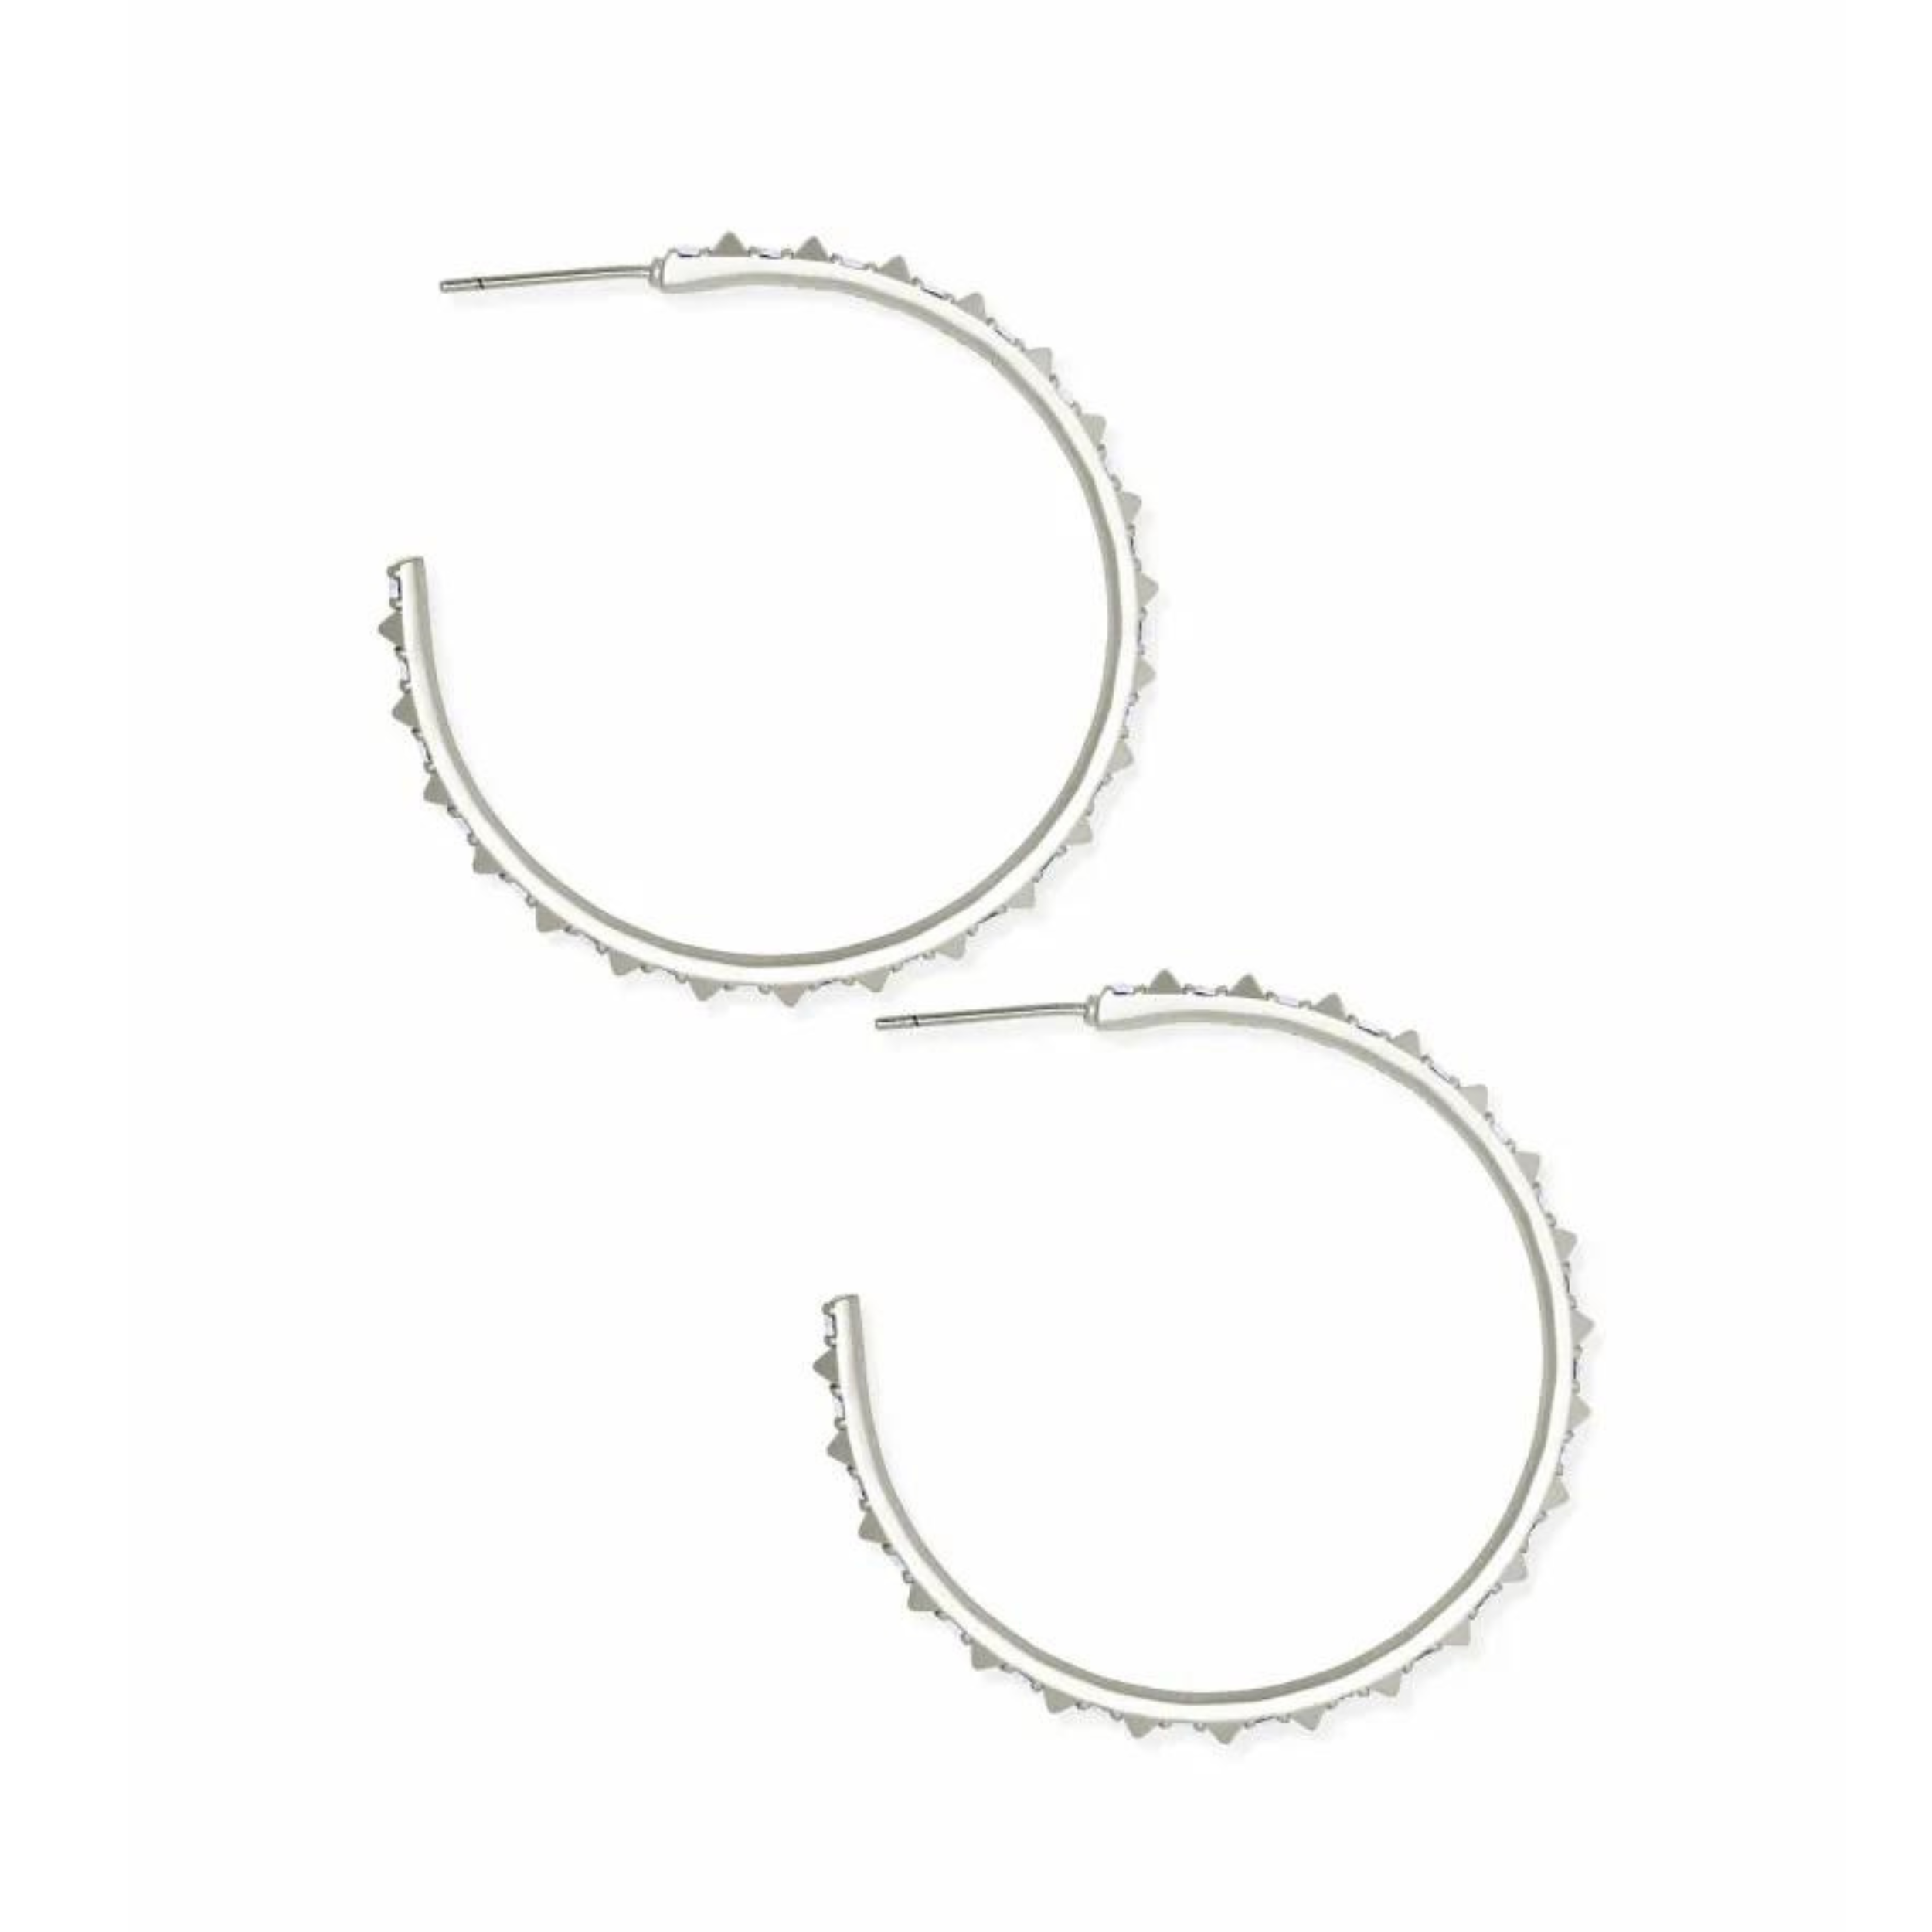 Kendra Scott | Veronica Hoop Earrings in Silver - Giddy Up Glamour Boutique